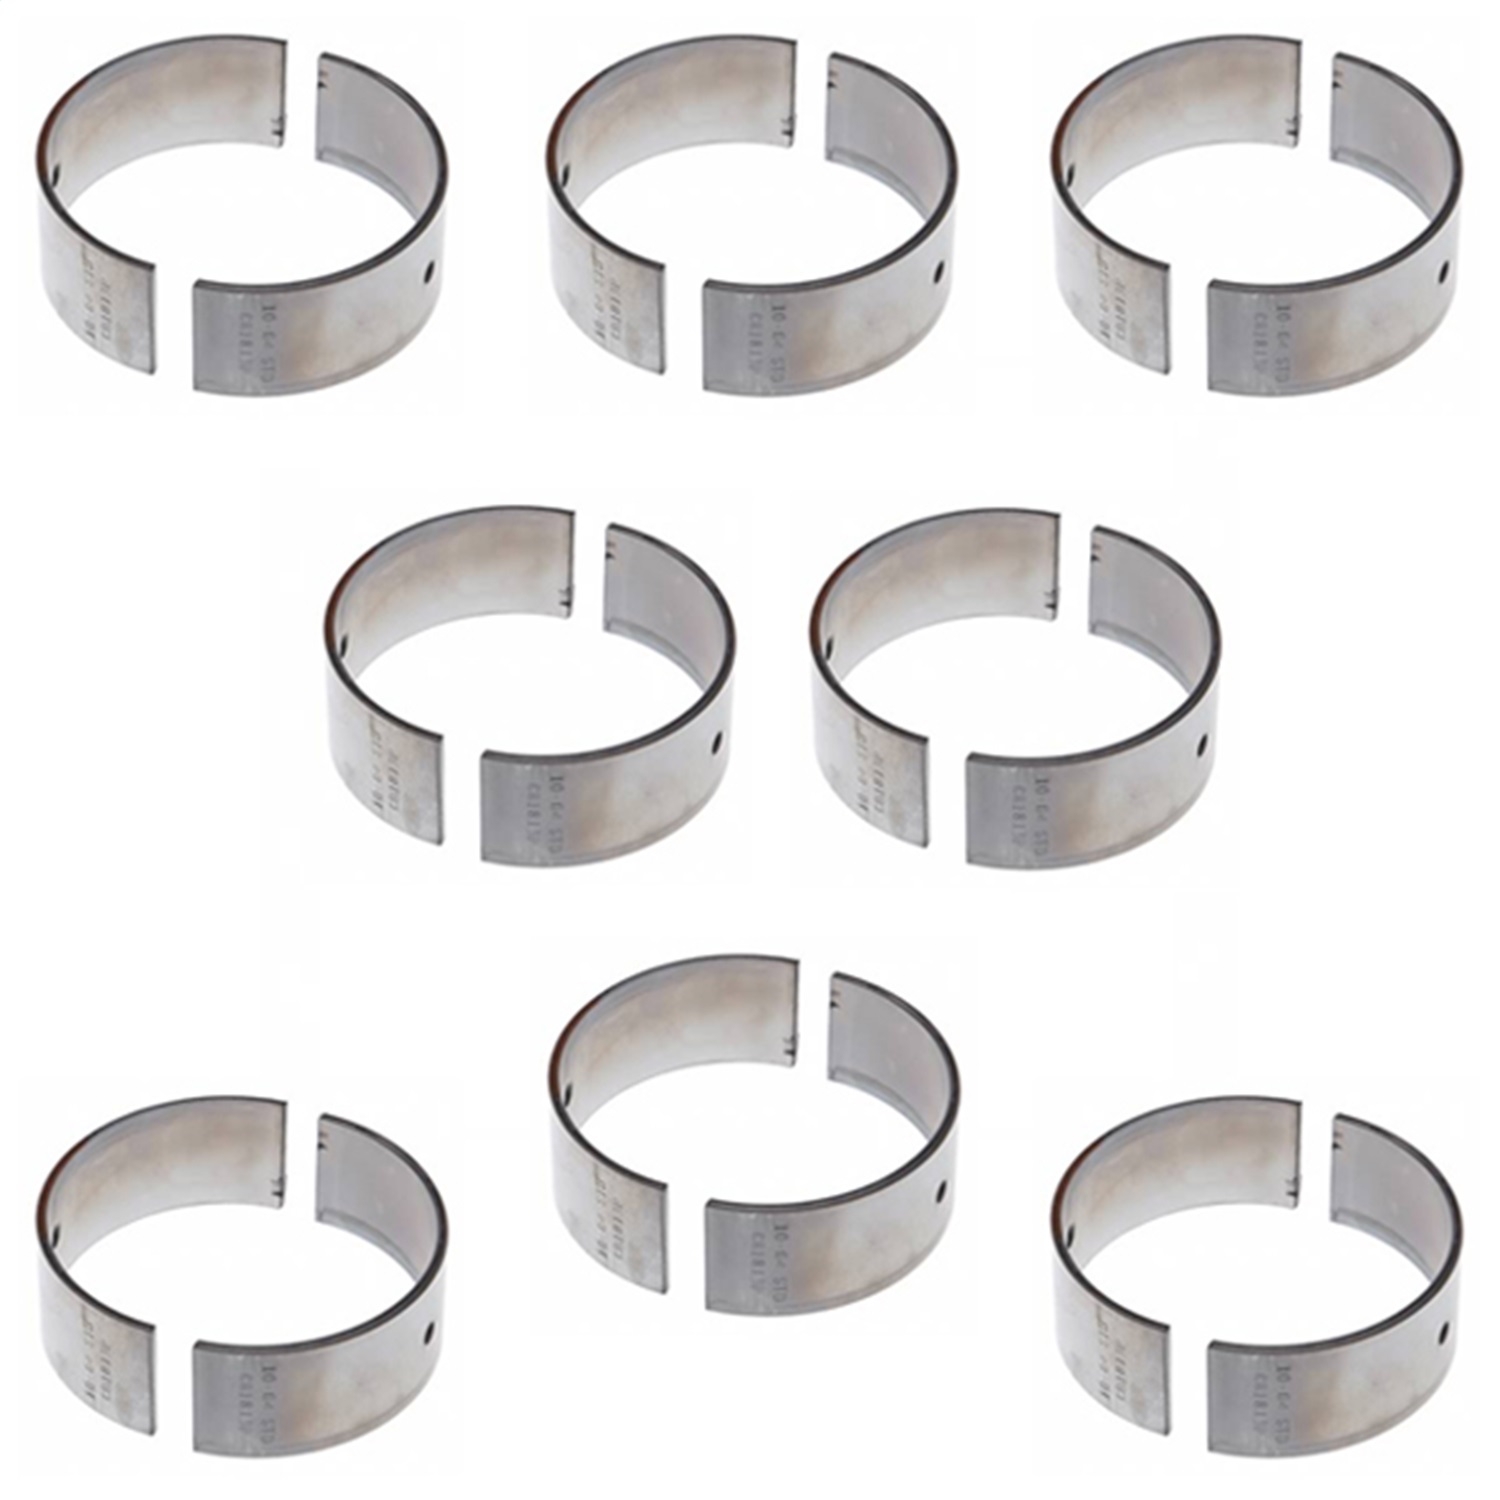 Jeep Omix Connecting Rod Bearing Set 4.7L, .010 Inch Over, 8 Pairs, 1999-2006 Models, BKGF-17467.51